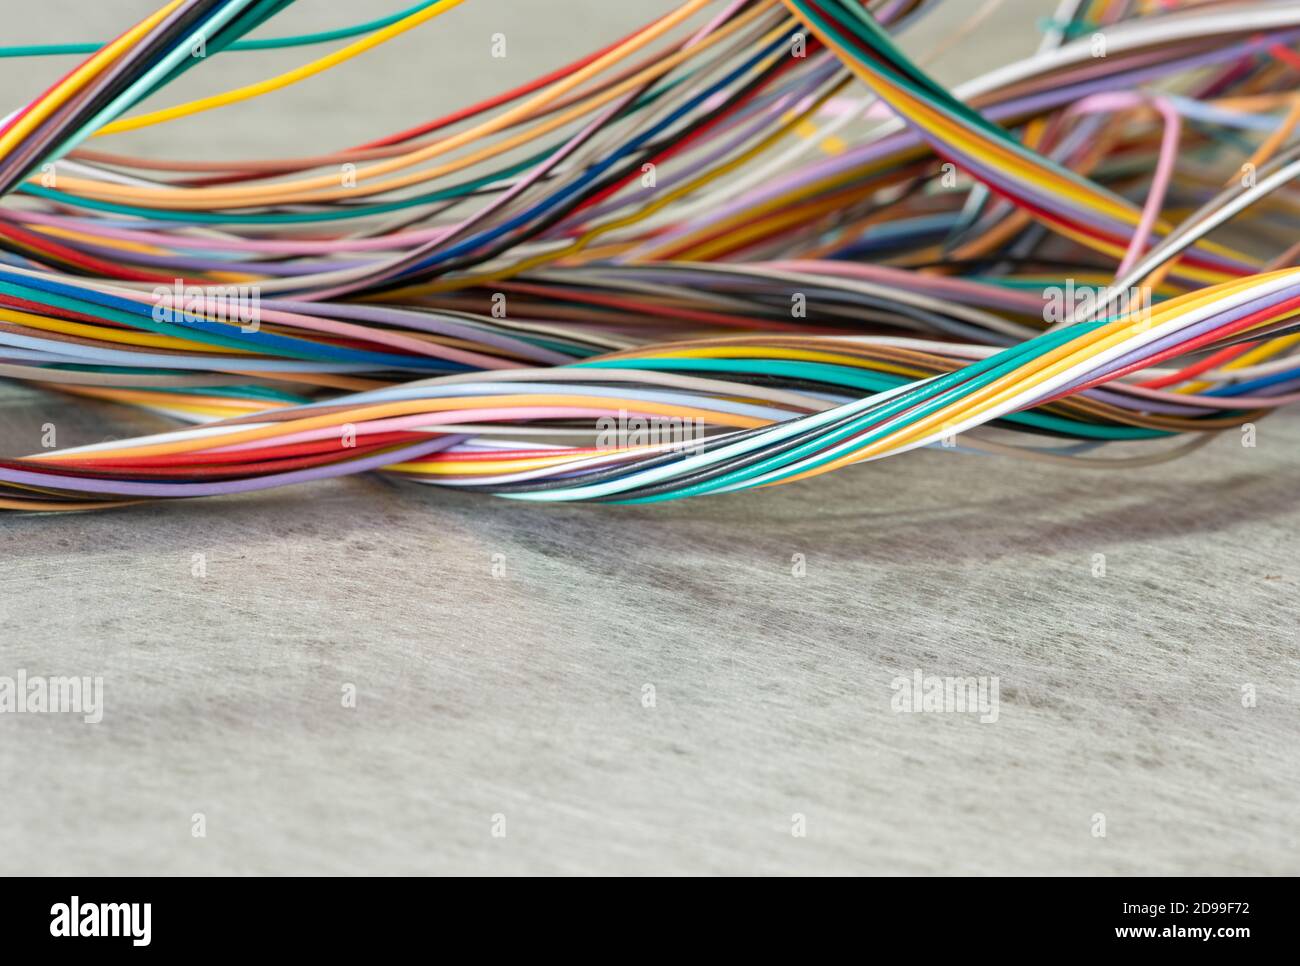 Electrical cable and wire in computer network and energy industry Stock Photo